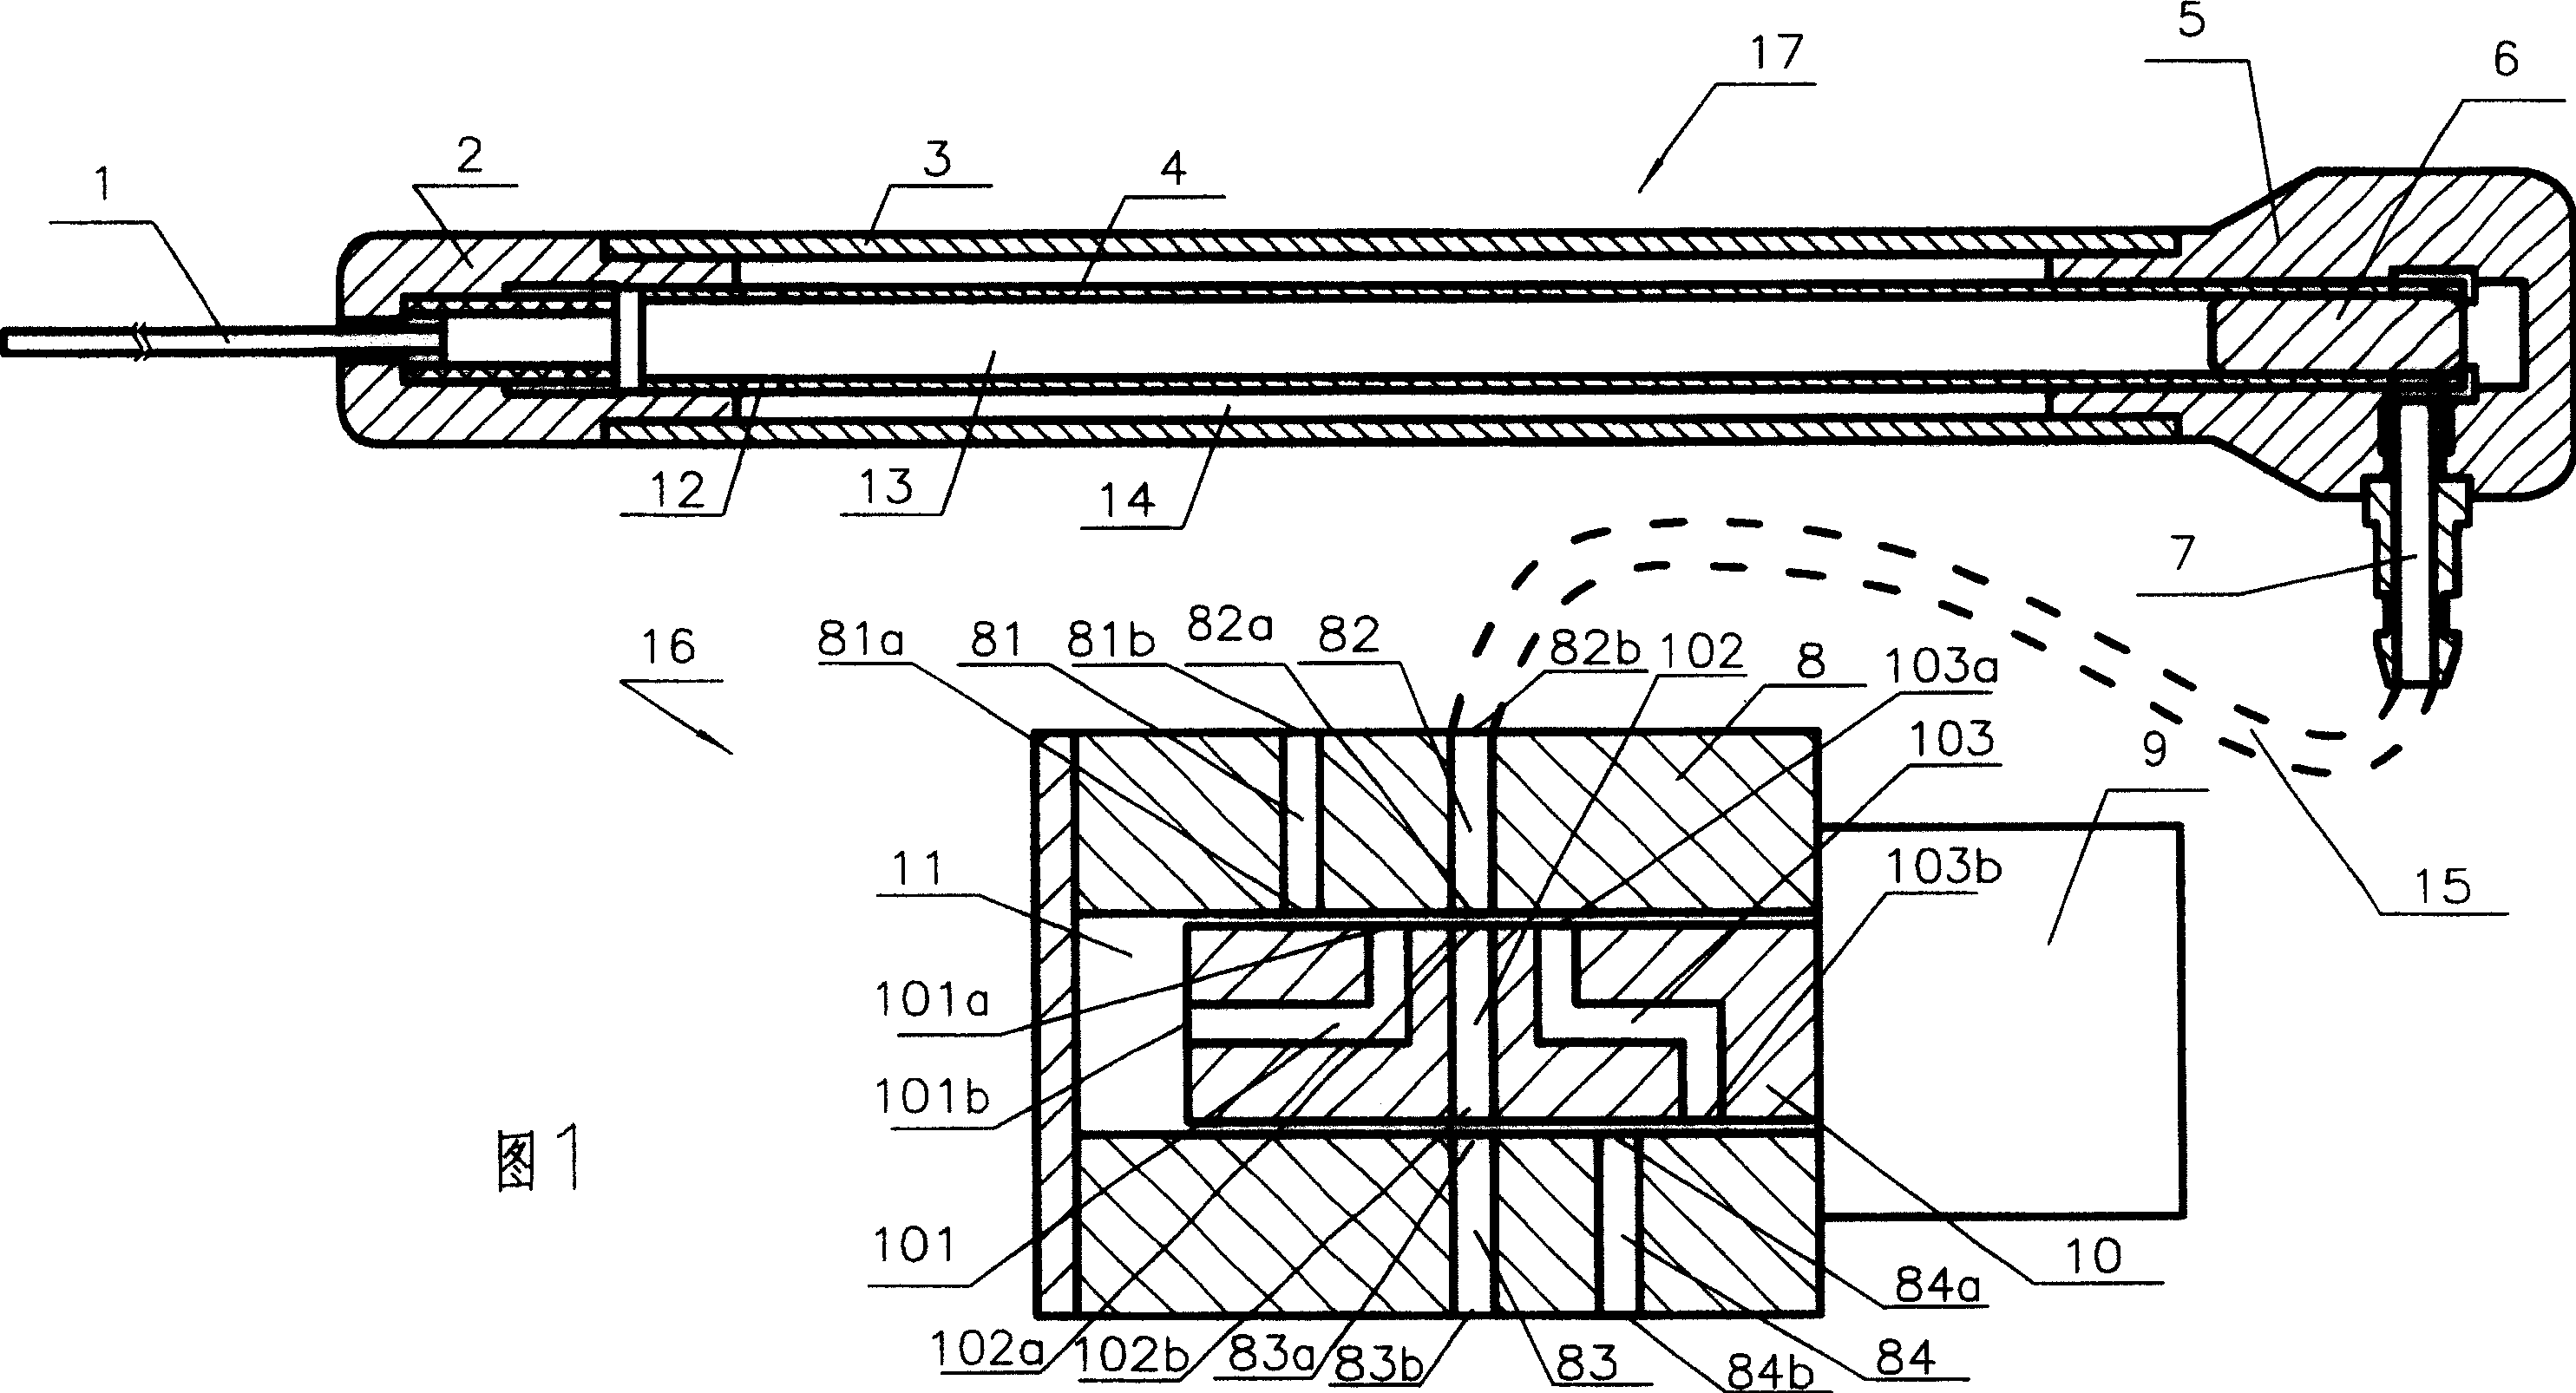 Air passage control system of tee joint vacuum valve in use for stone crusher of ballistic curve